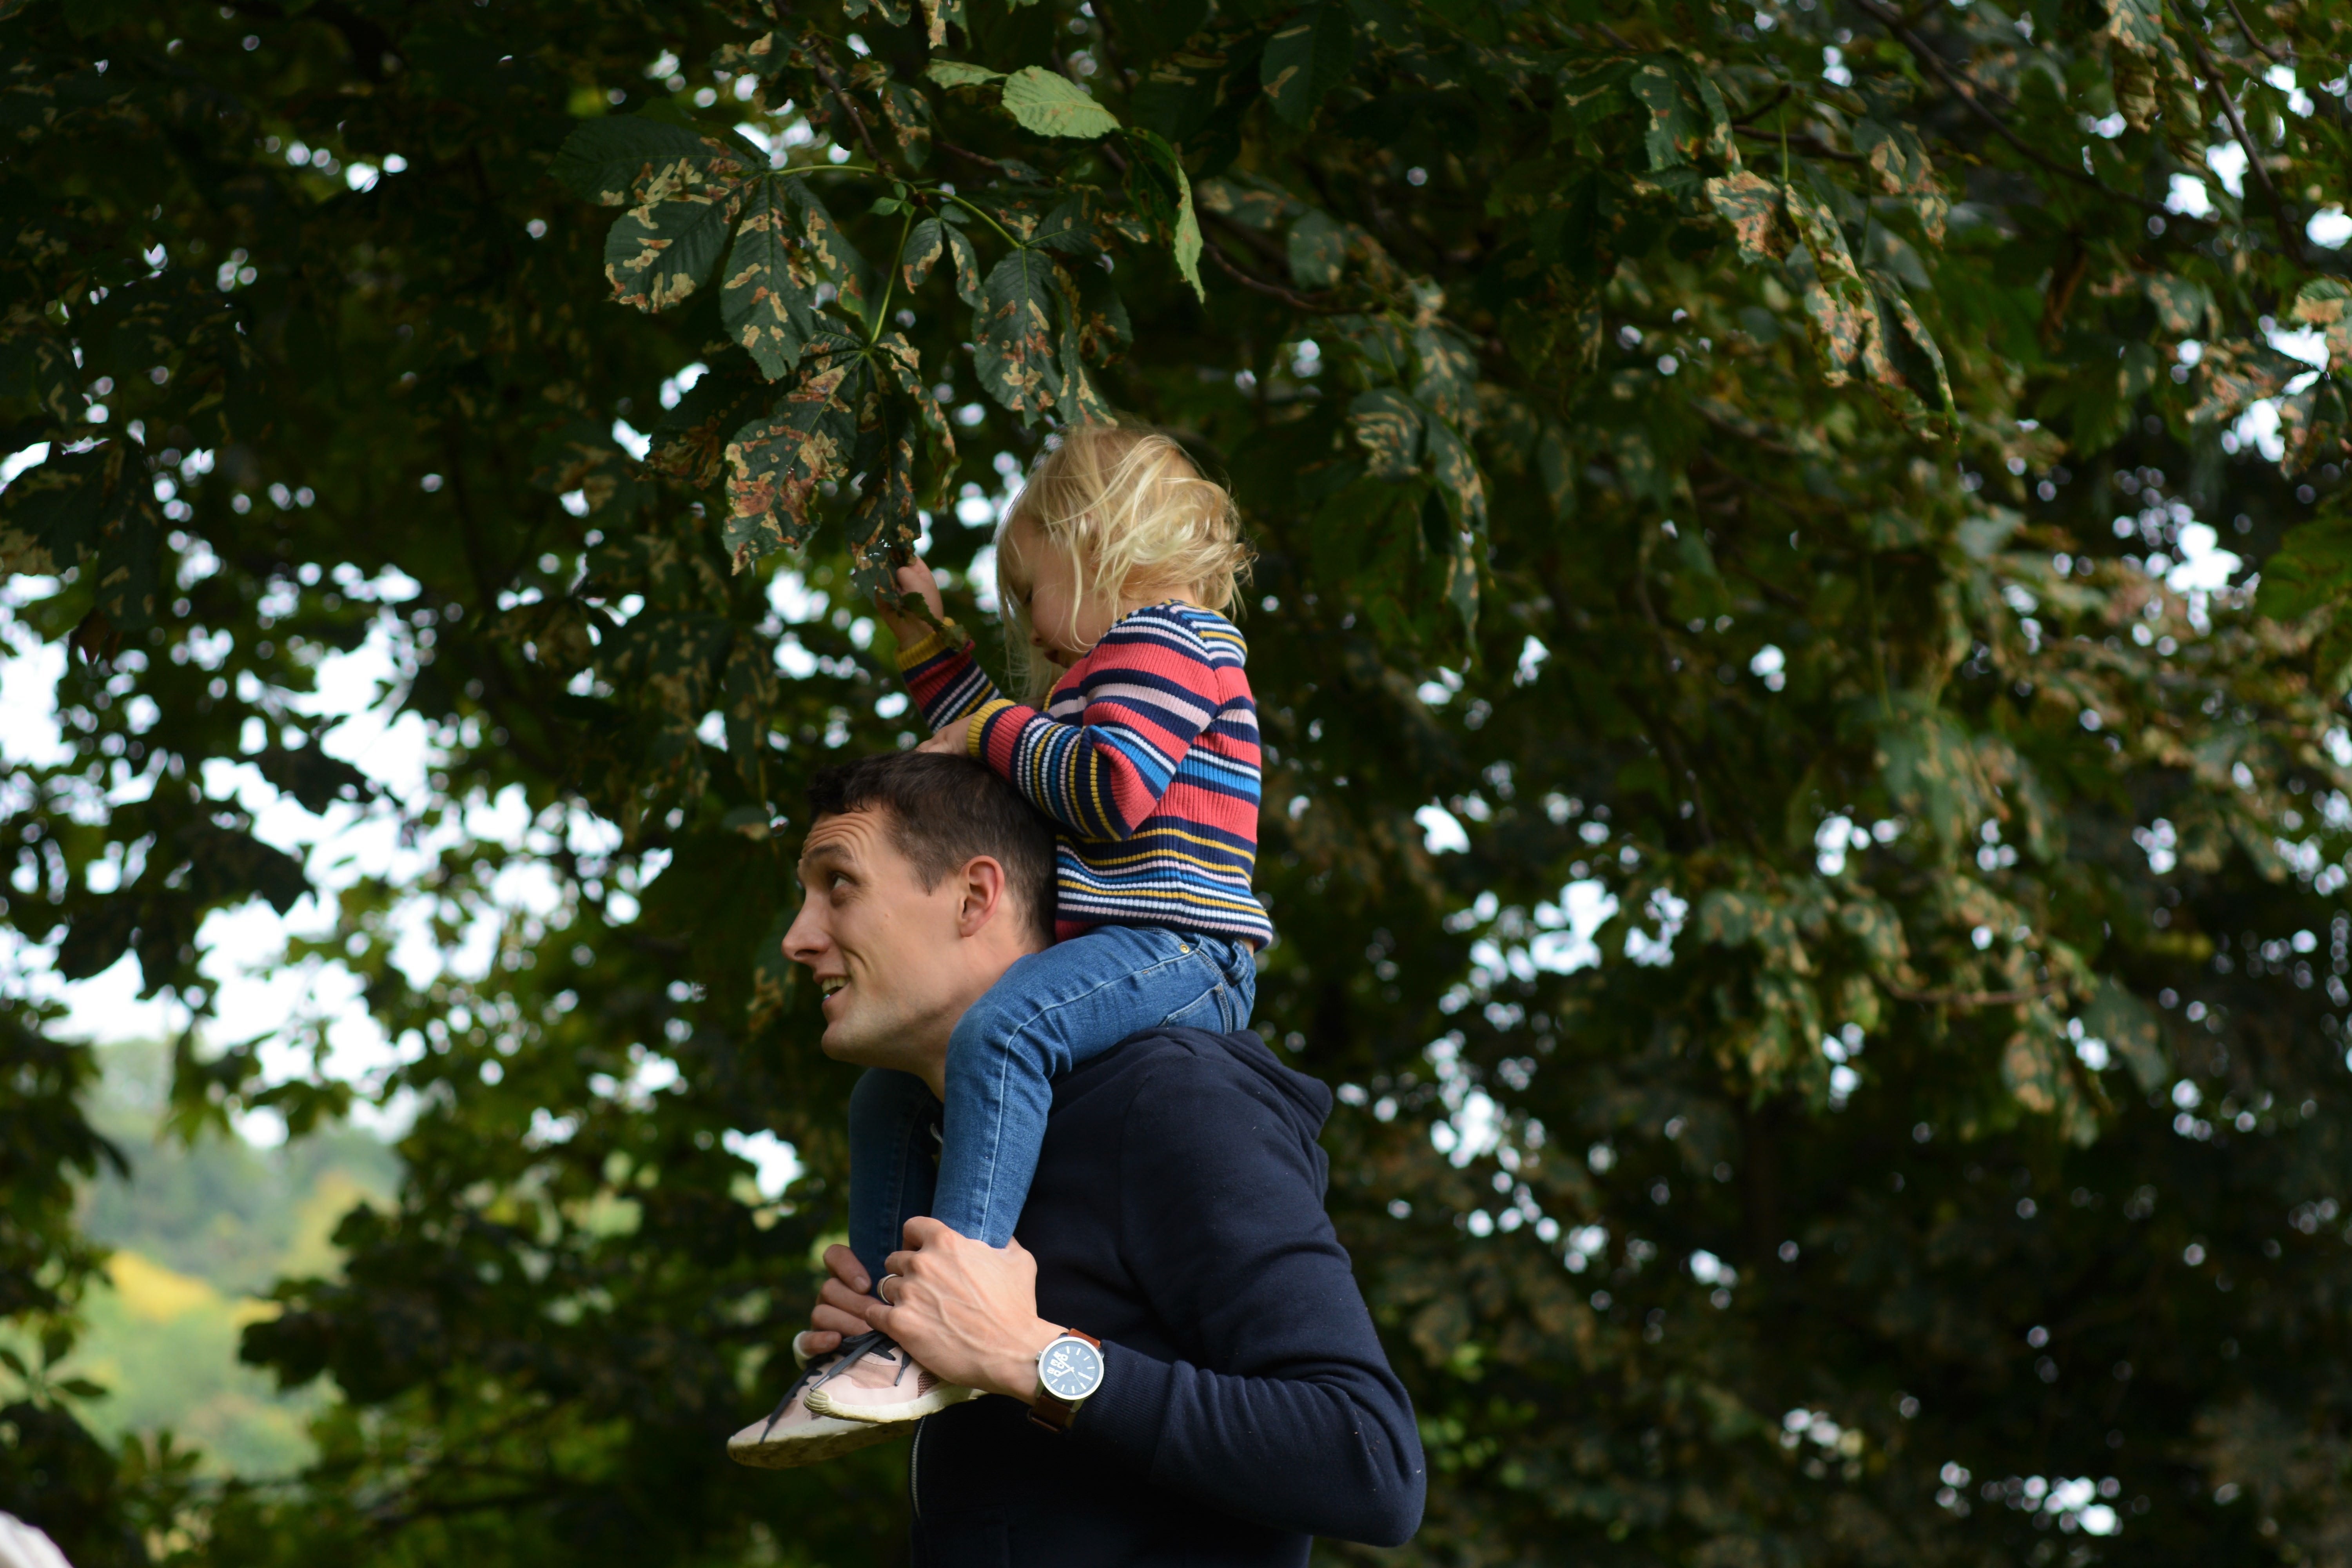 conker picking and embracing autumn